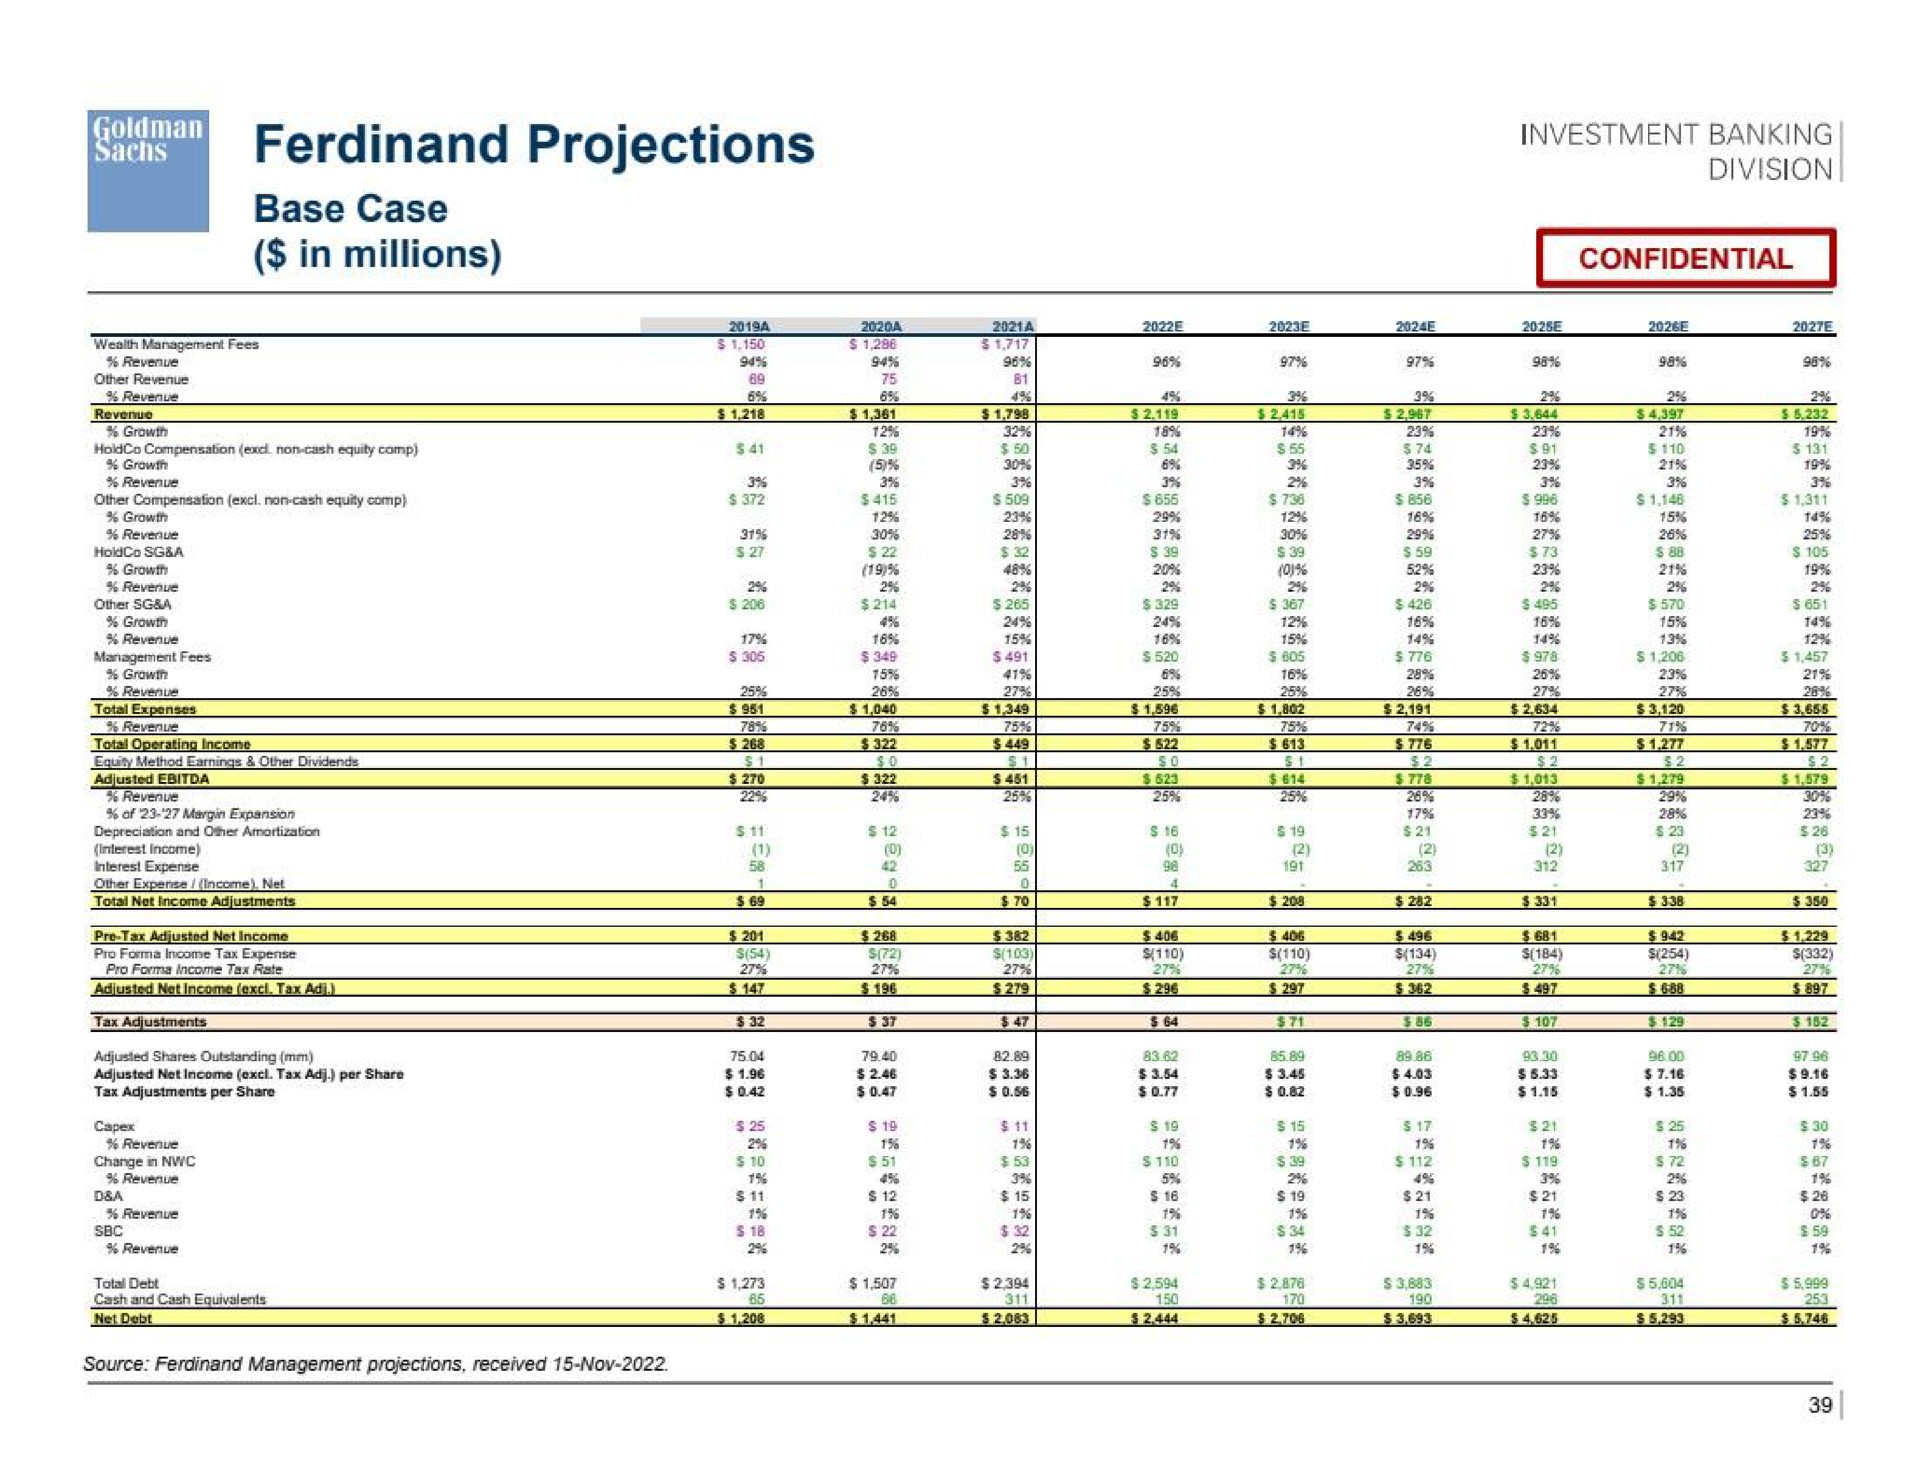 wise projections in millions investment | Goldman Sachs